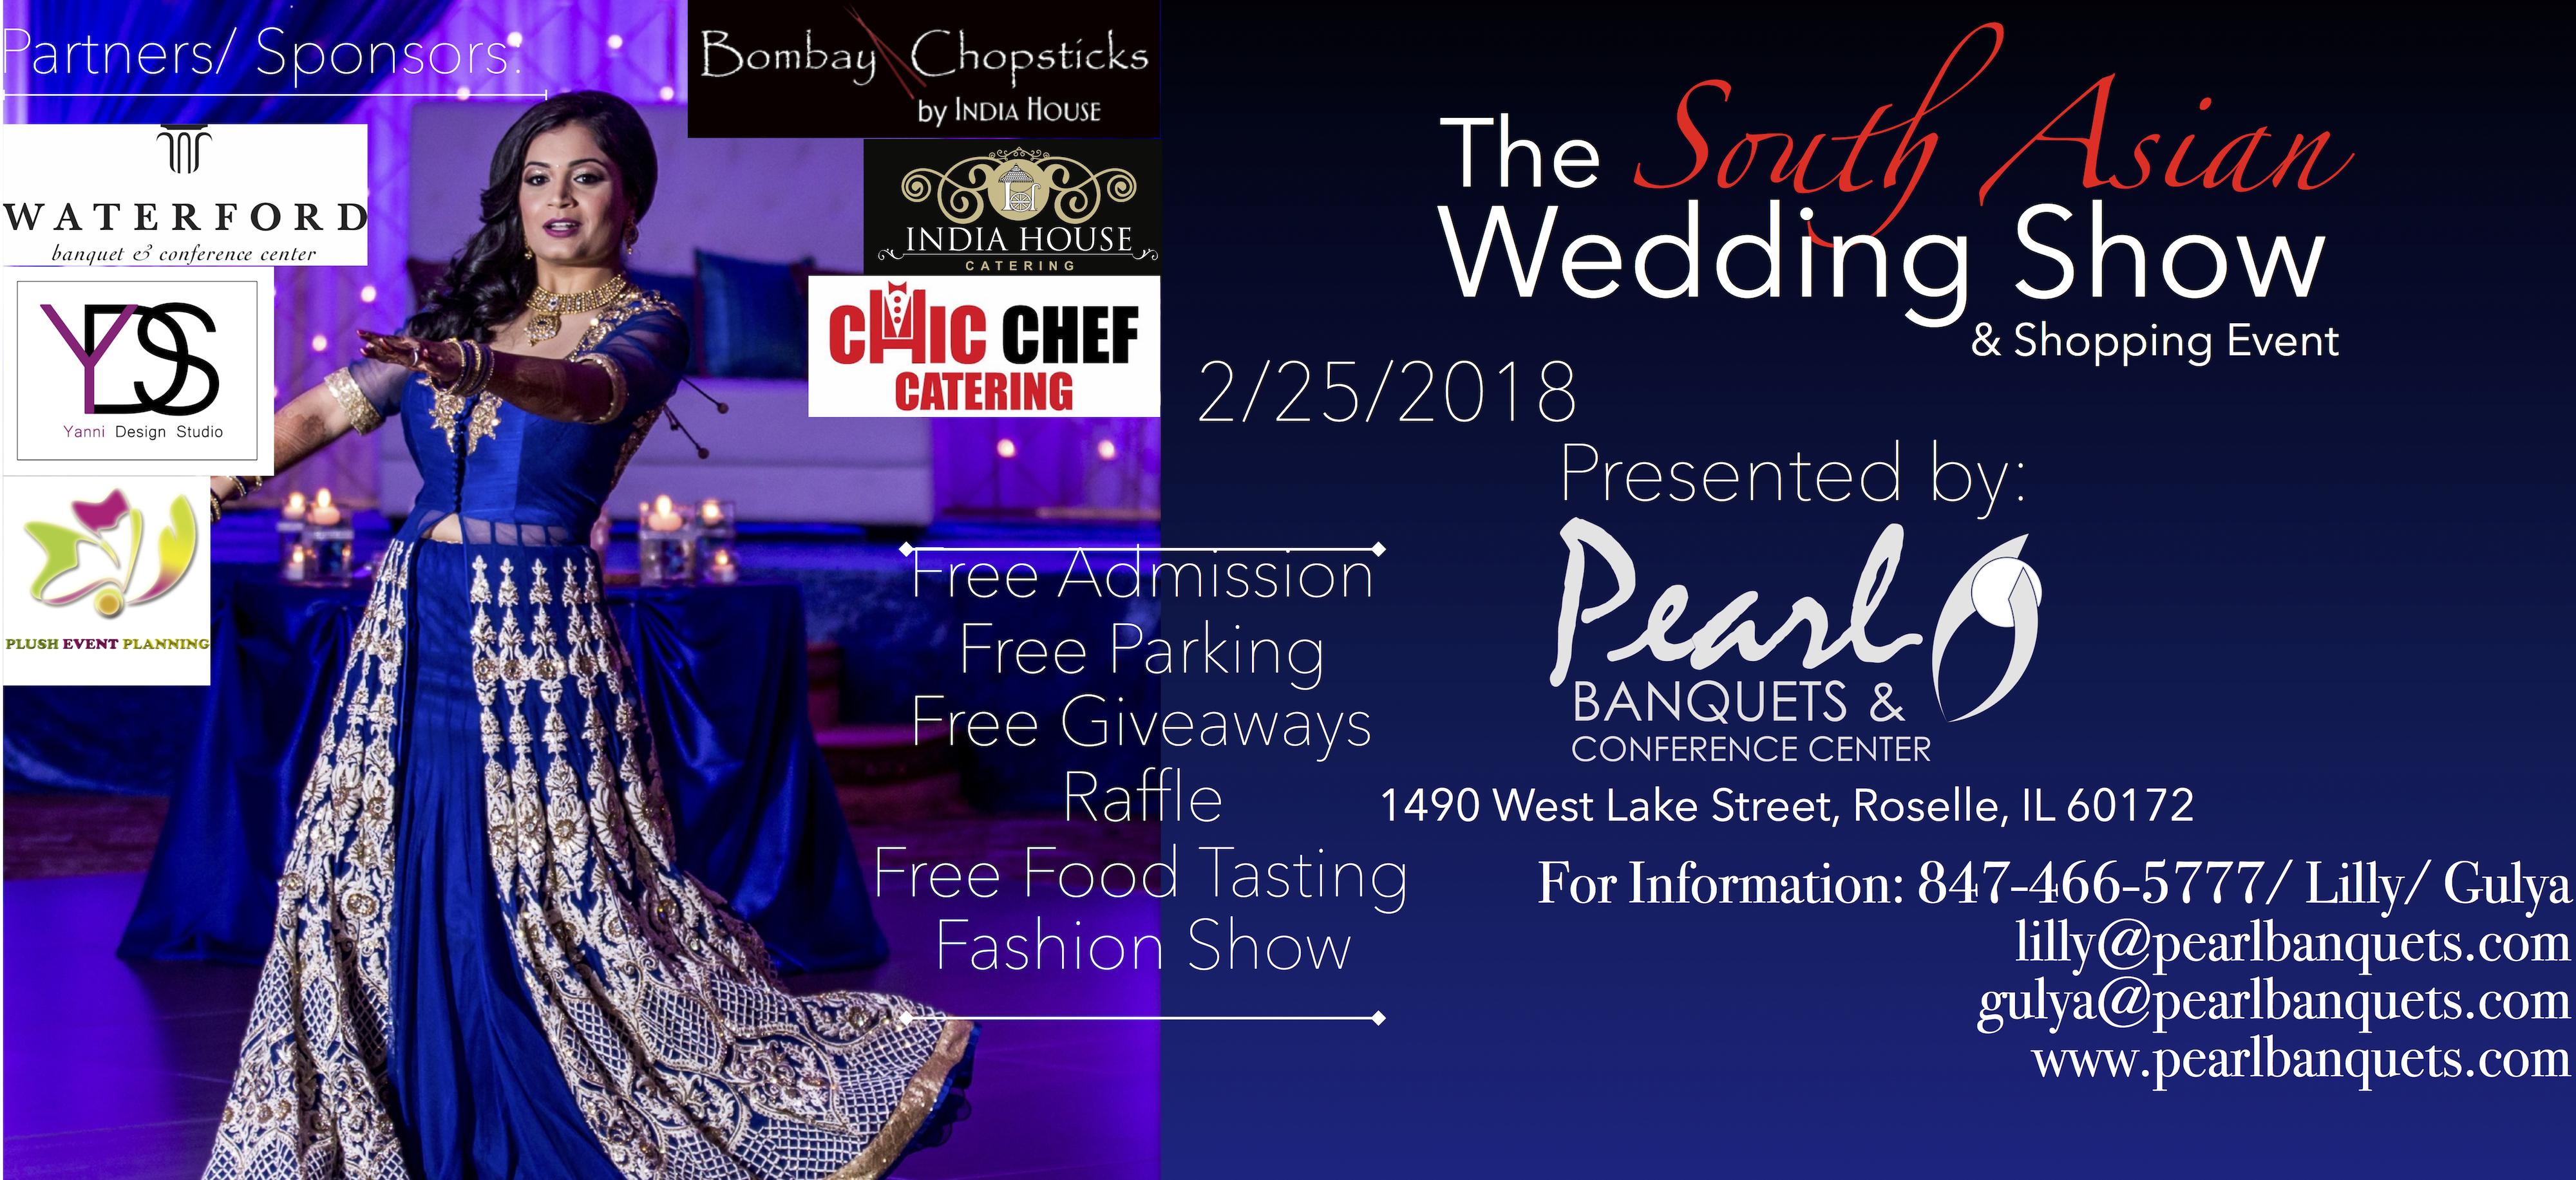 South Asian Wedding Expo & Shopping Event at Pearl Banquets 